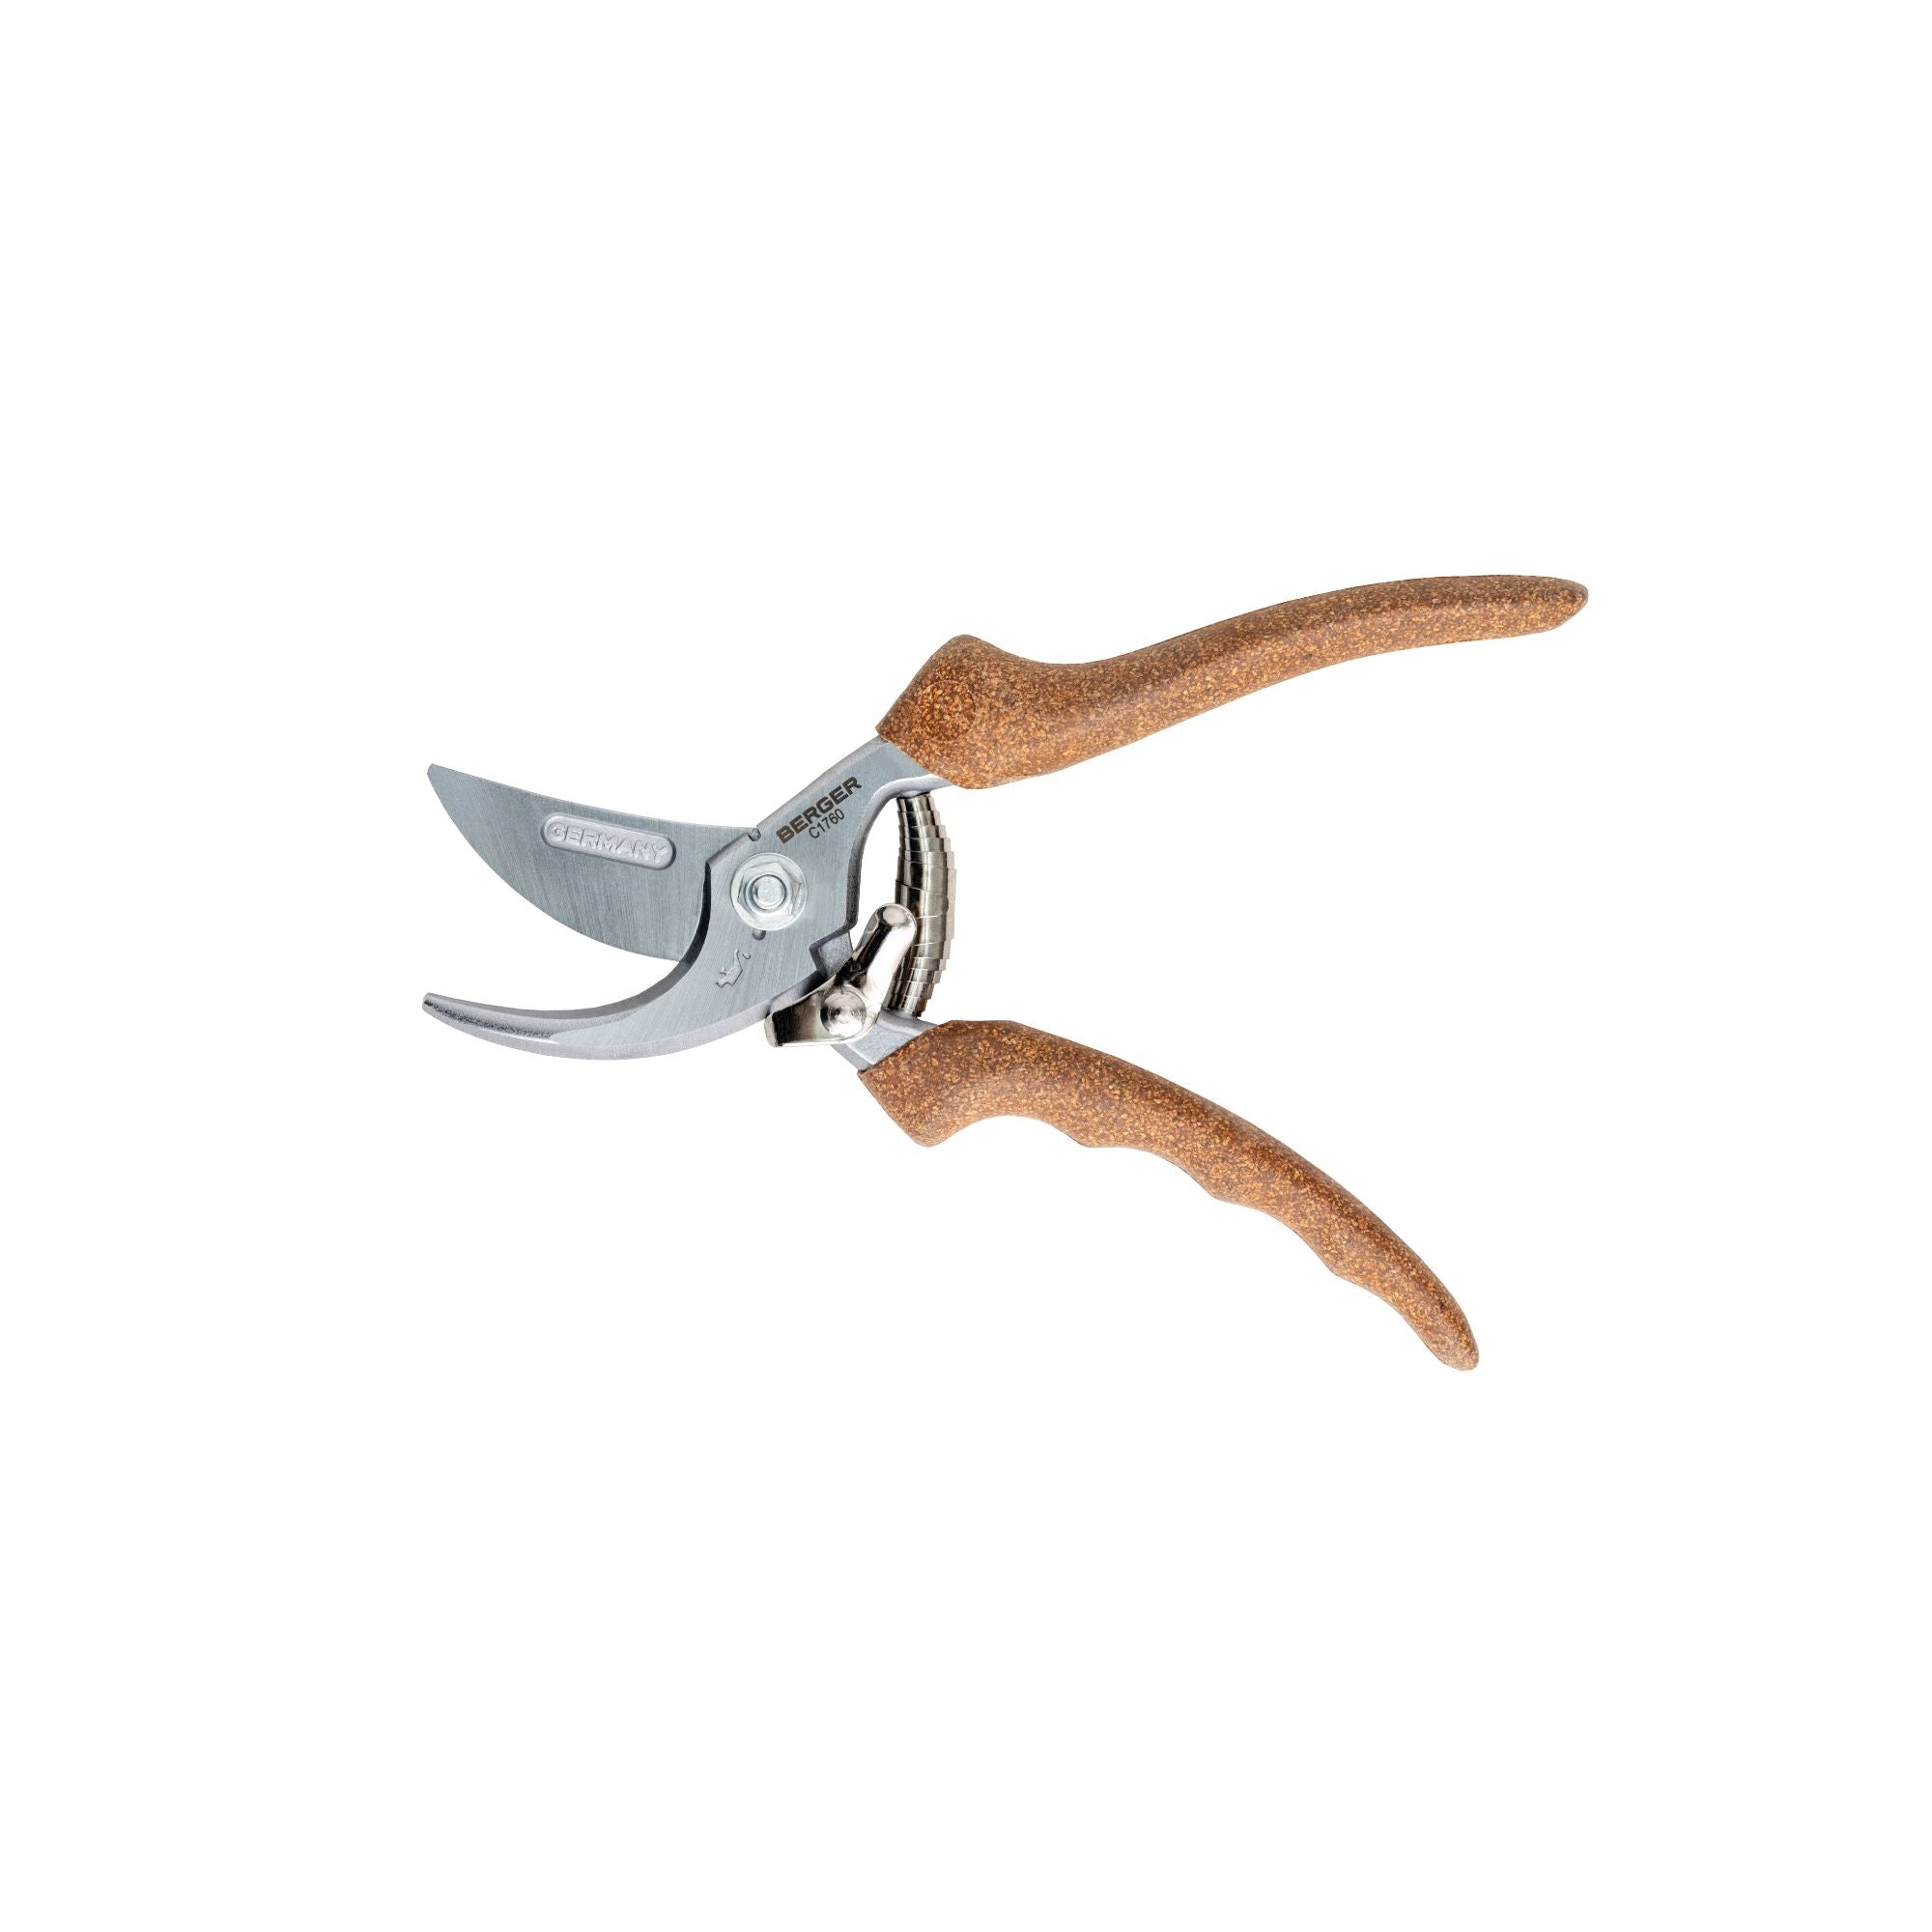 Hand shears bypass C1760 | Cork handle | Straight cutting head & forged metal body